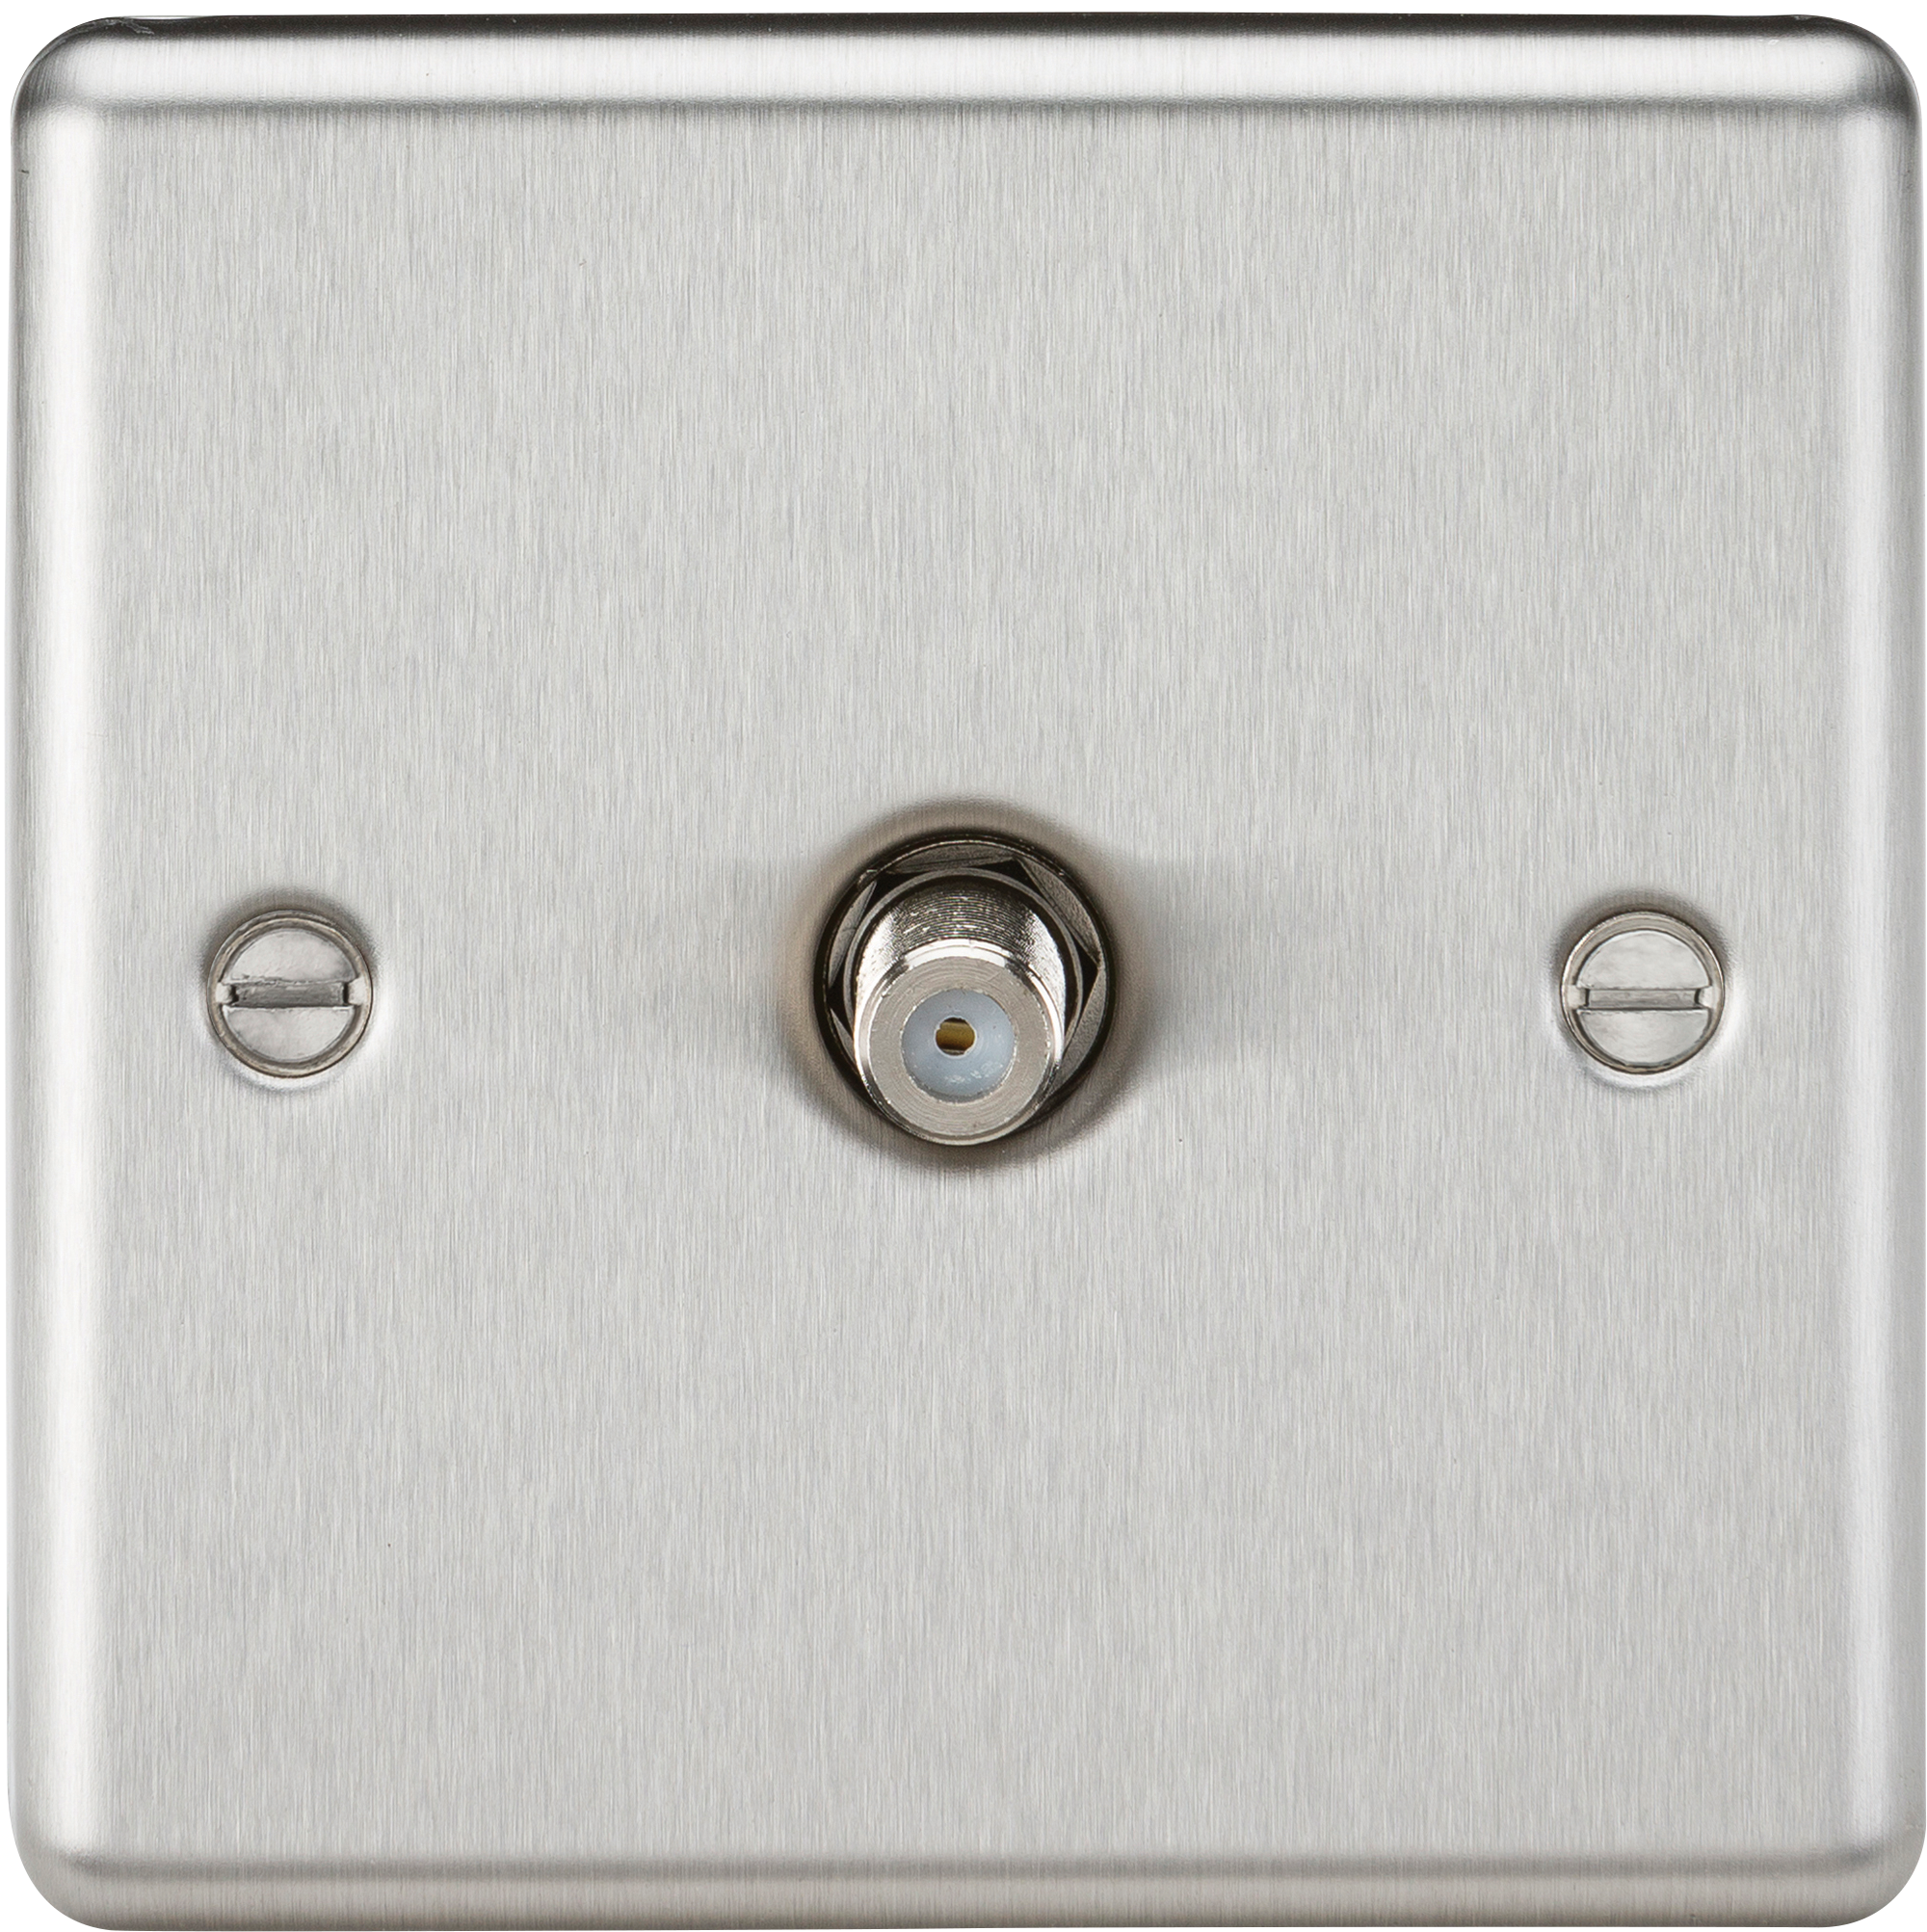 Sat TV Outlet - Rounded Edge Brushed Chrome - CL015BC 